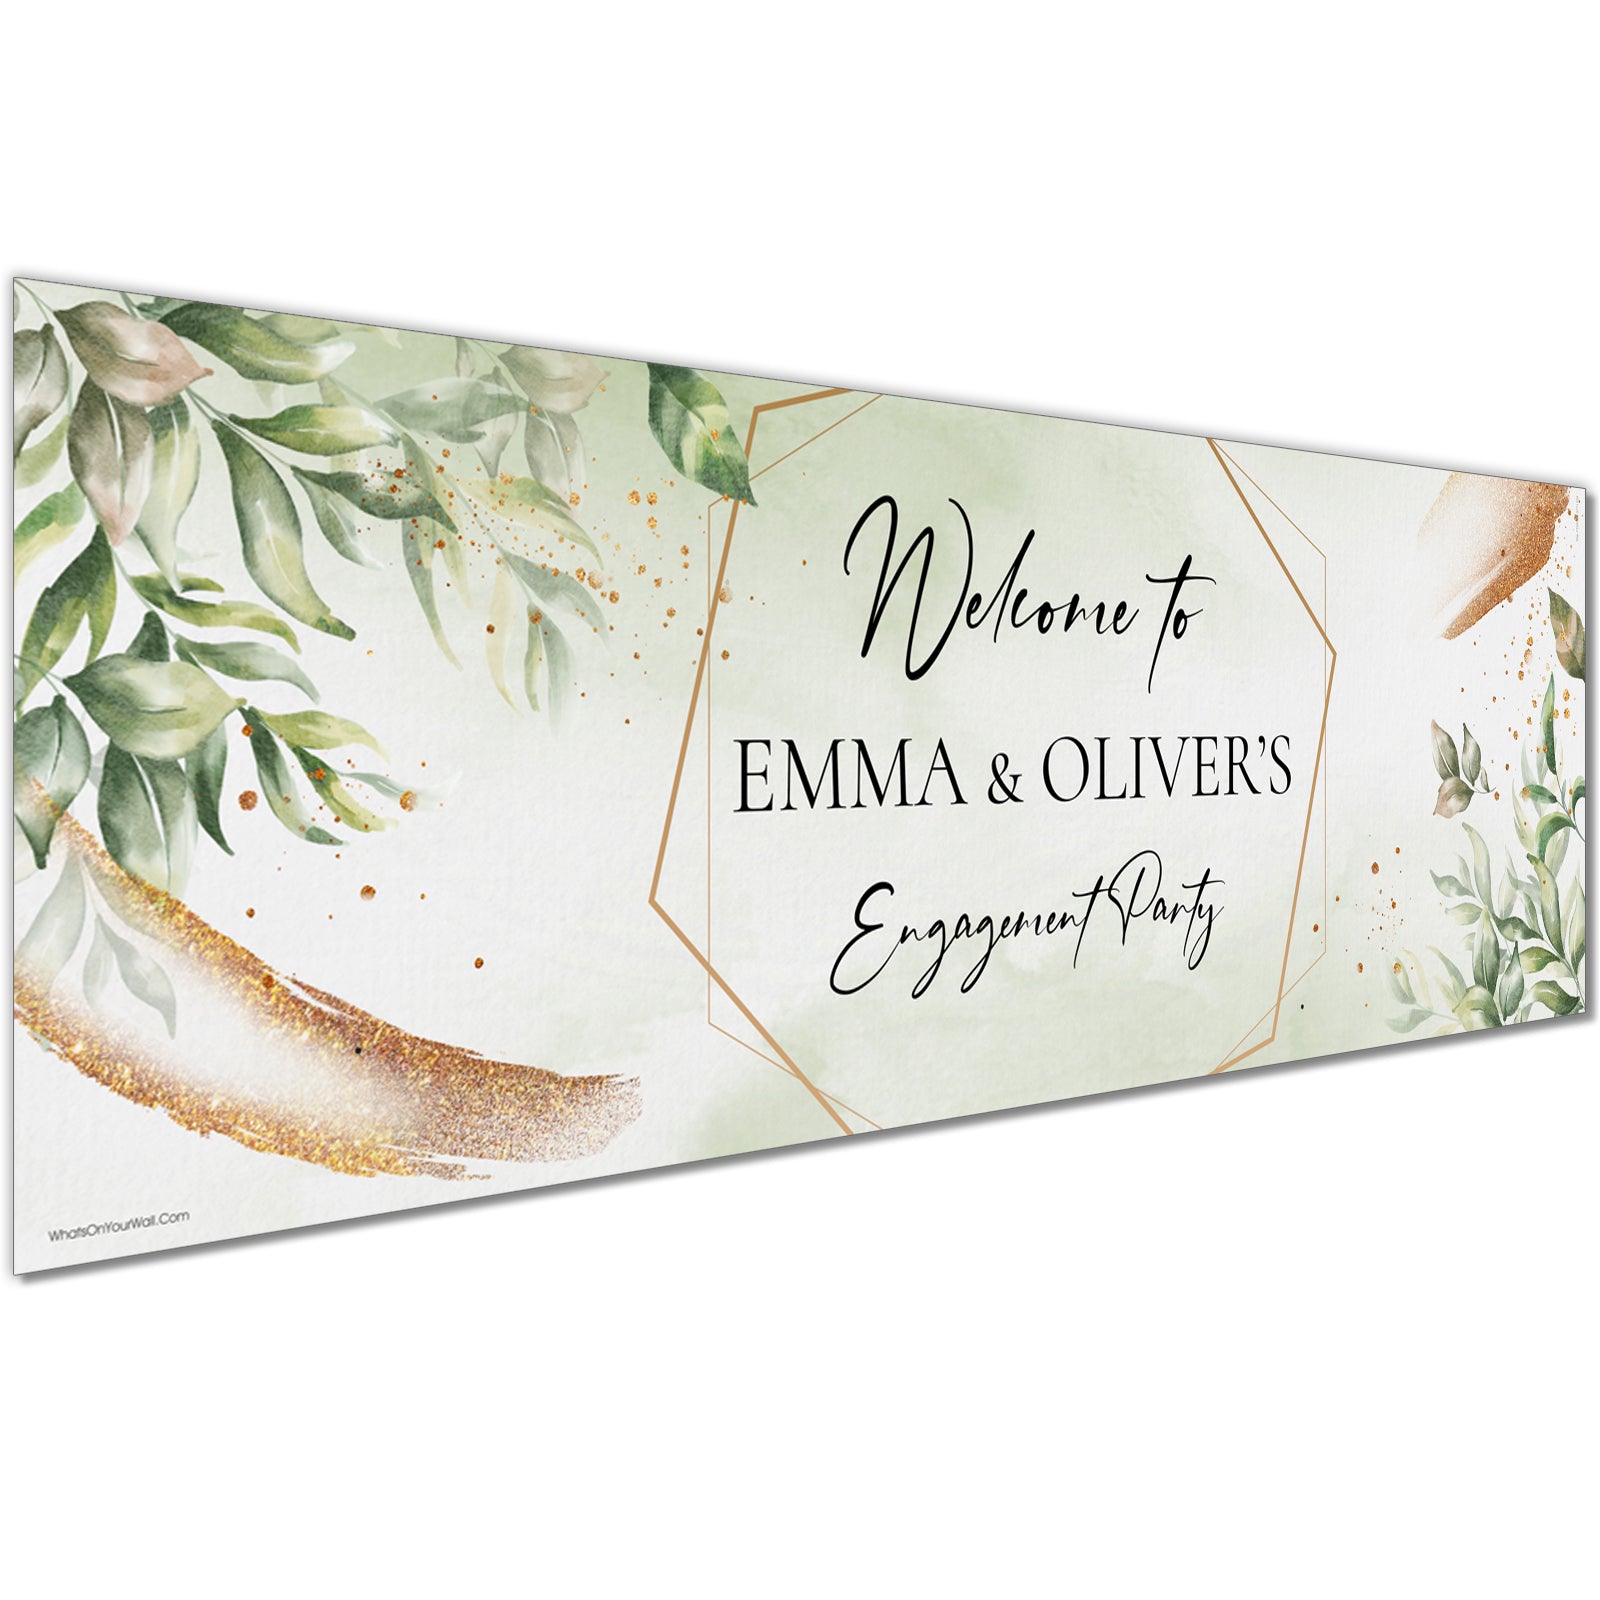 Personalised Engagement Banners in Green Leaf Design